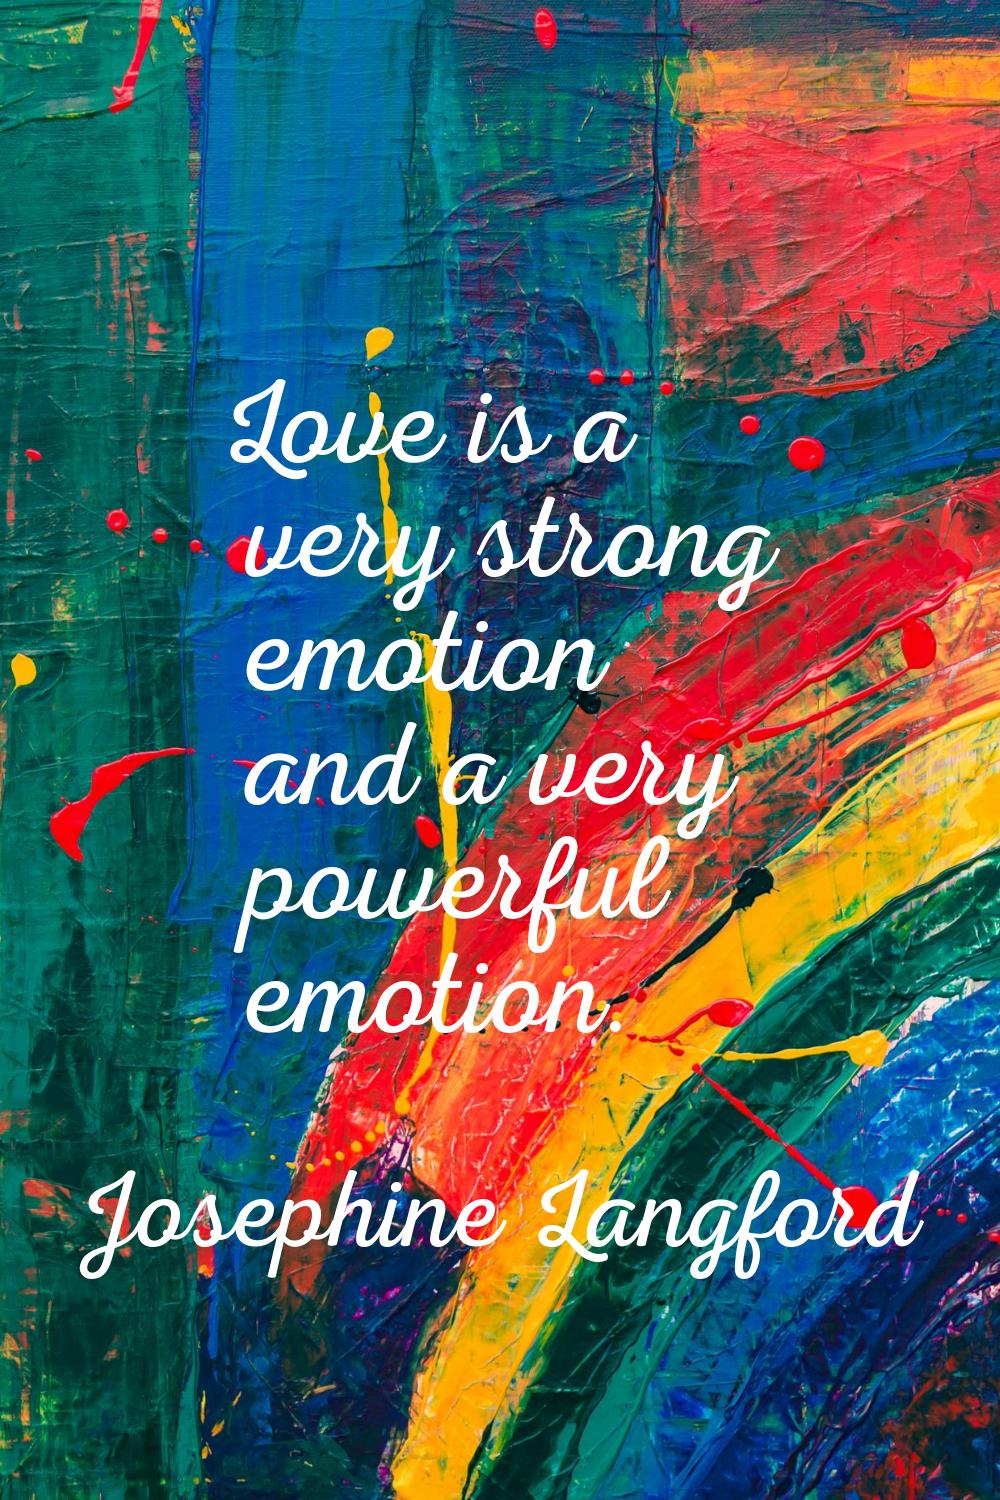 Love is a very strong emotion and a very powerful emotion.